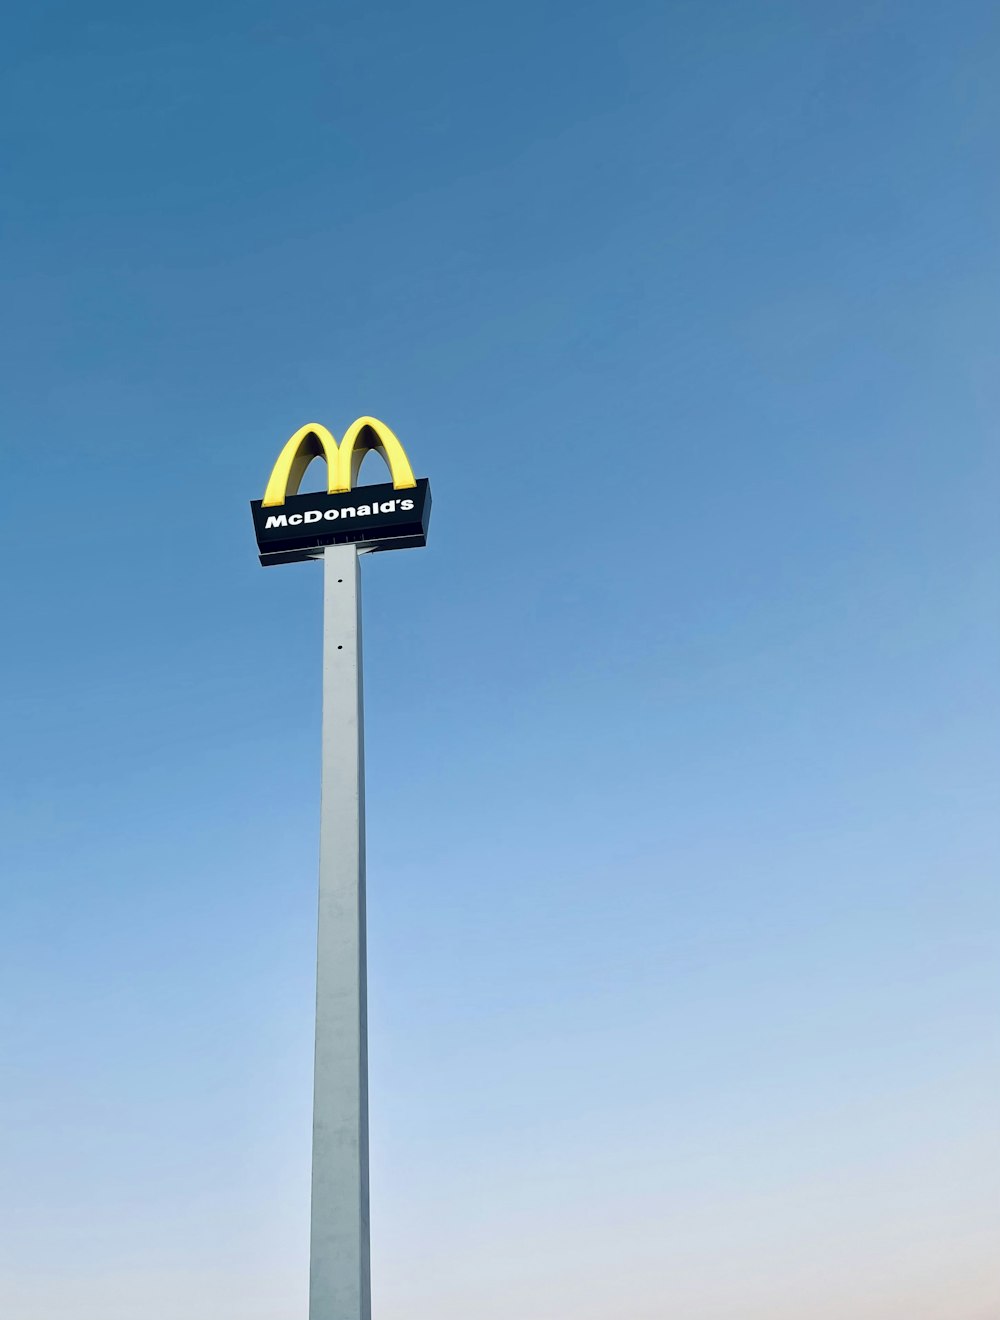 a mcdonald's sign on top of a tall pole